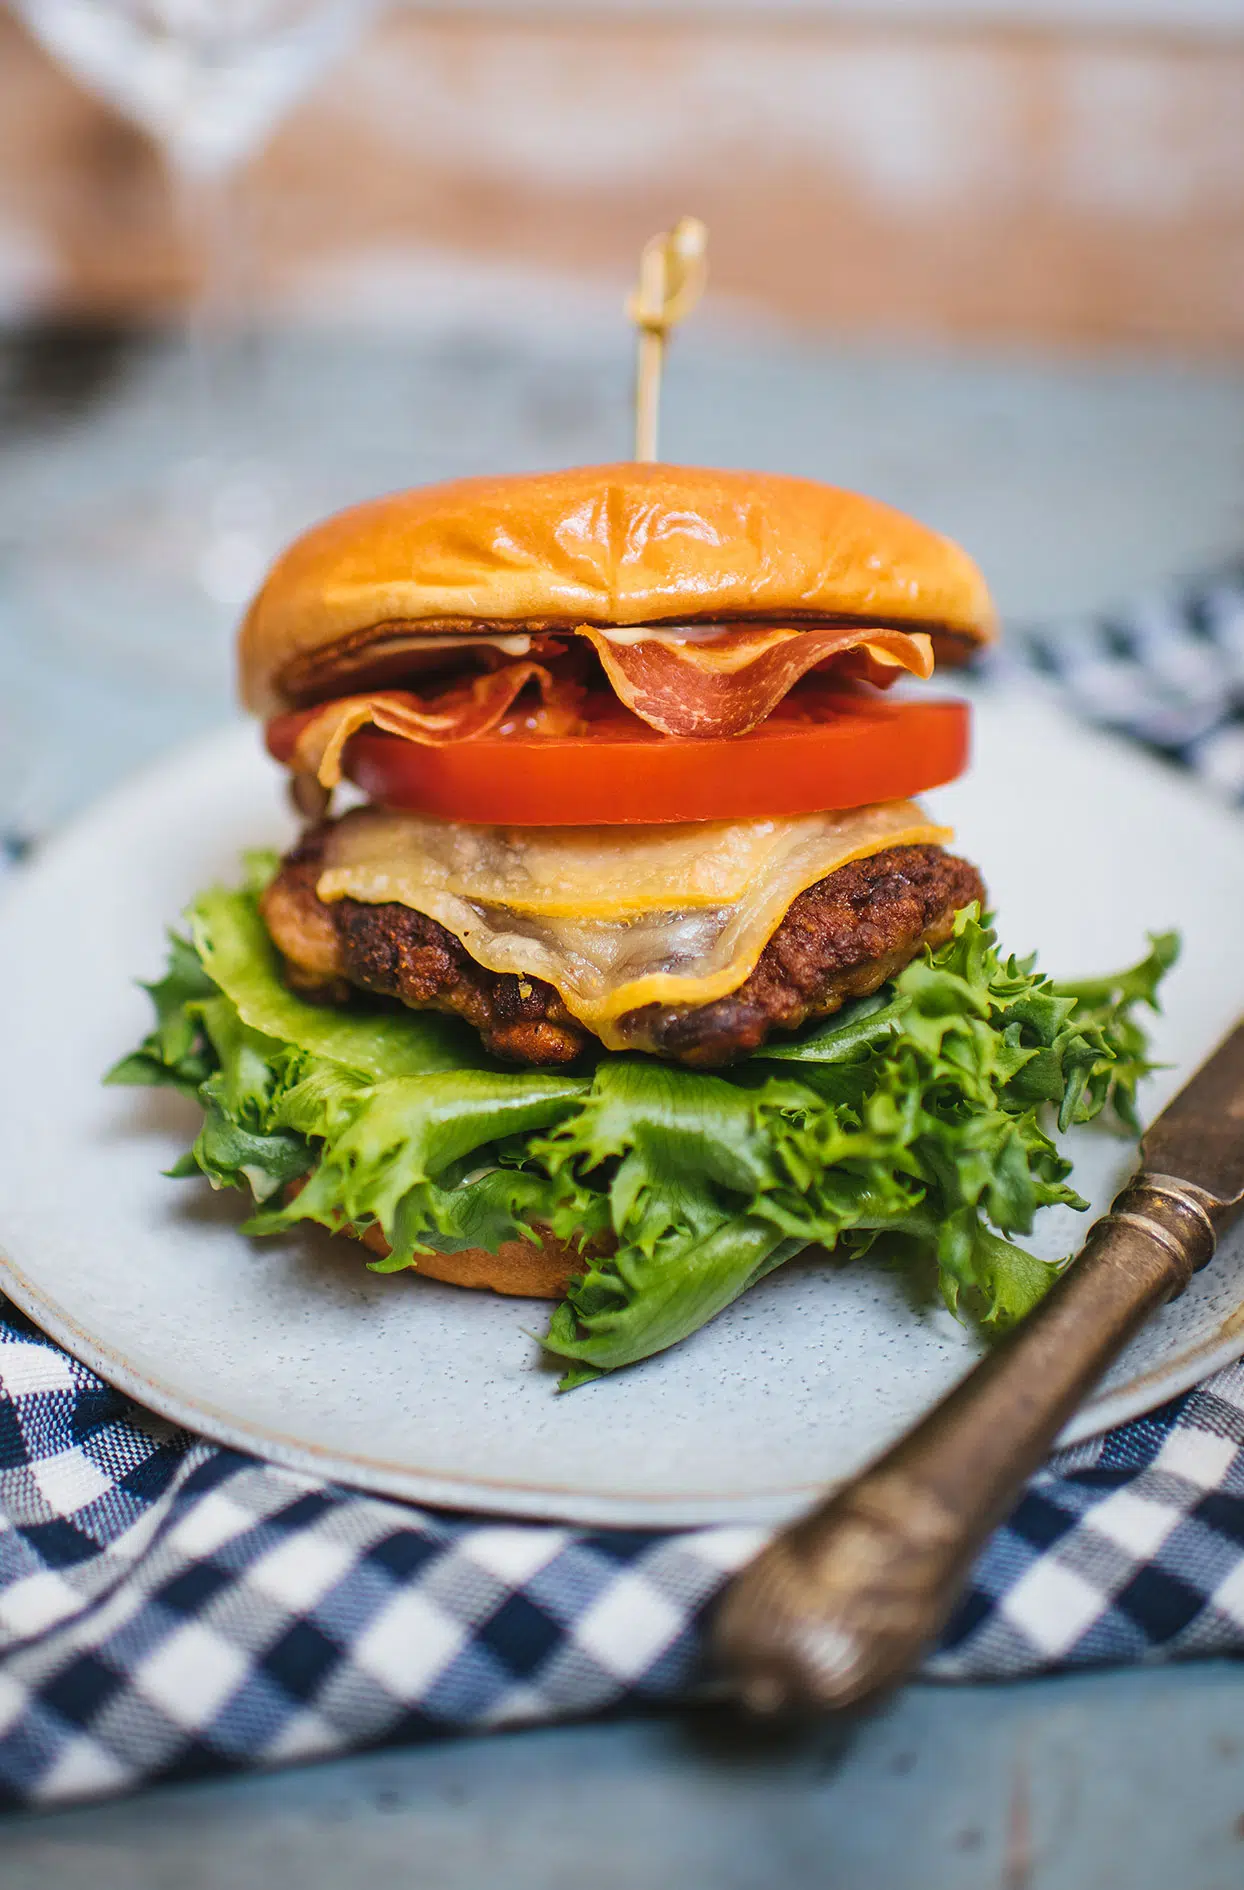 Spicy Italian sausage burgers with haloumi cheese